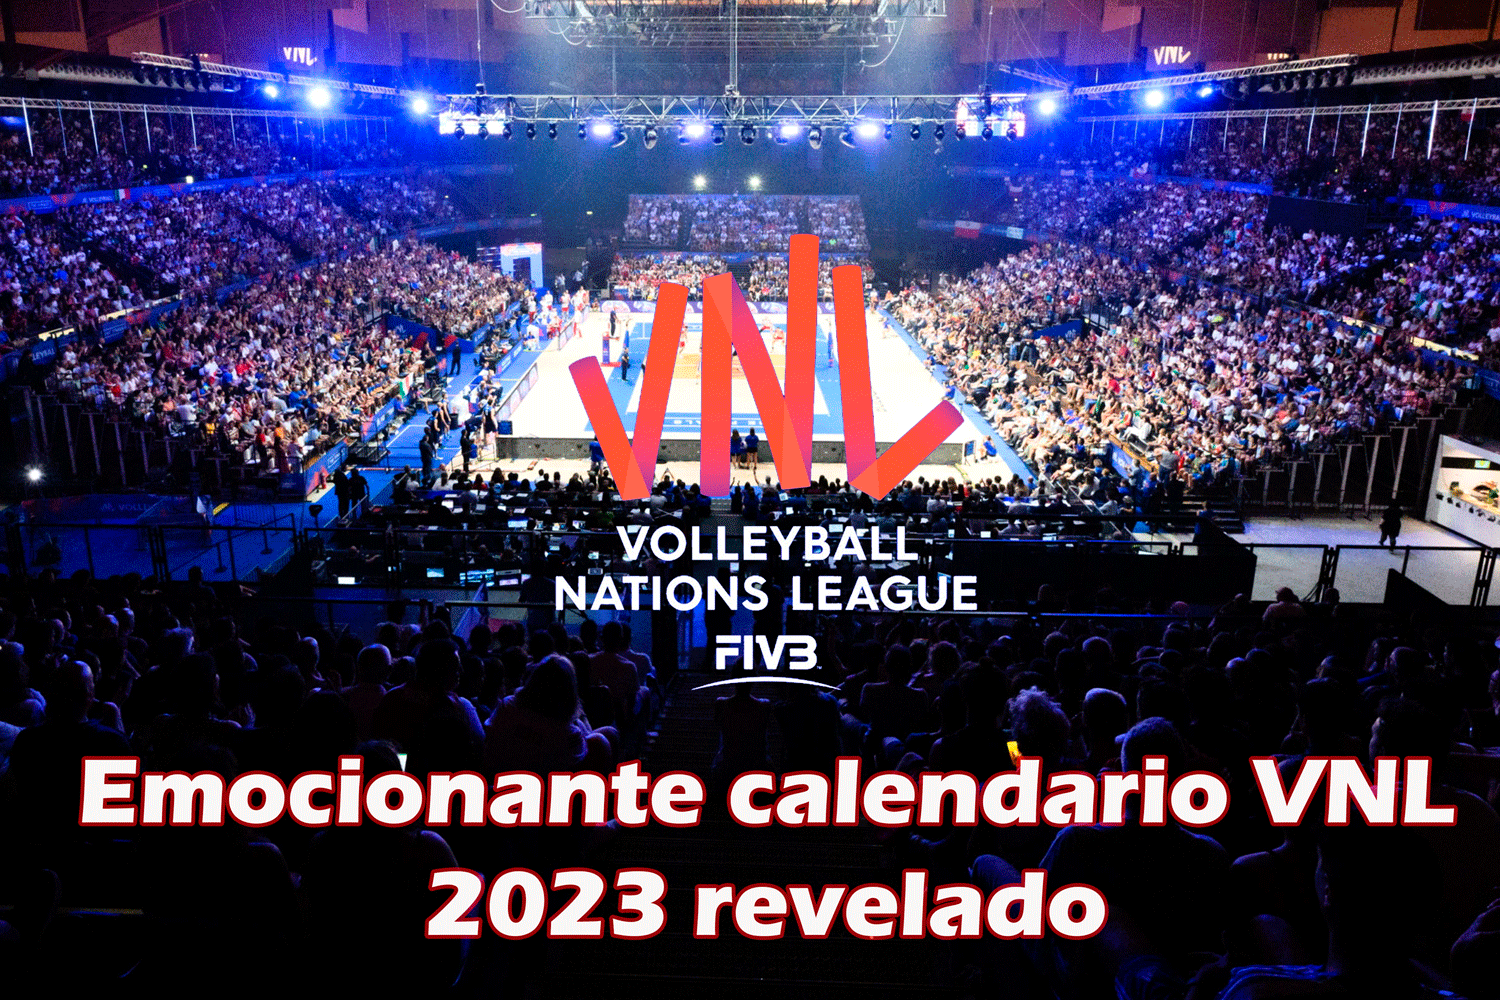 The fifth season of the Volleyball Nations League will start on May 30 